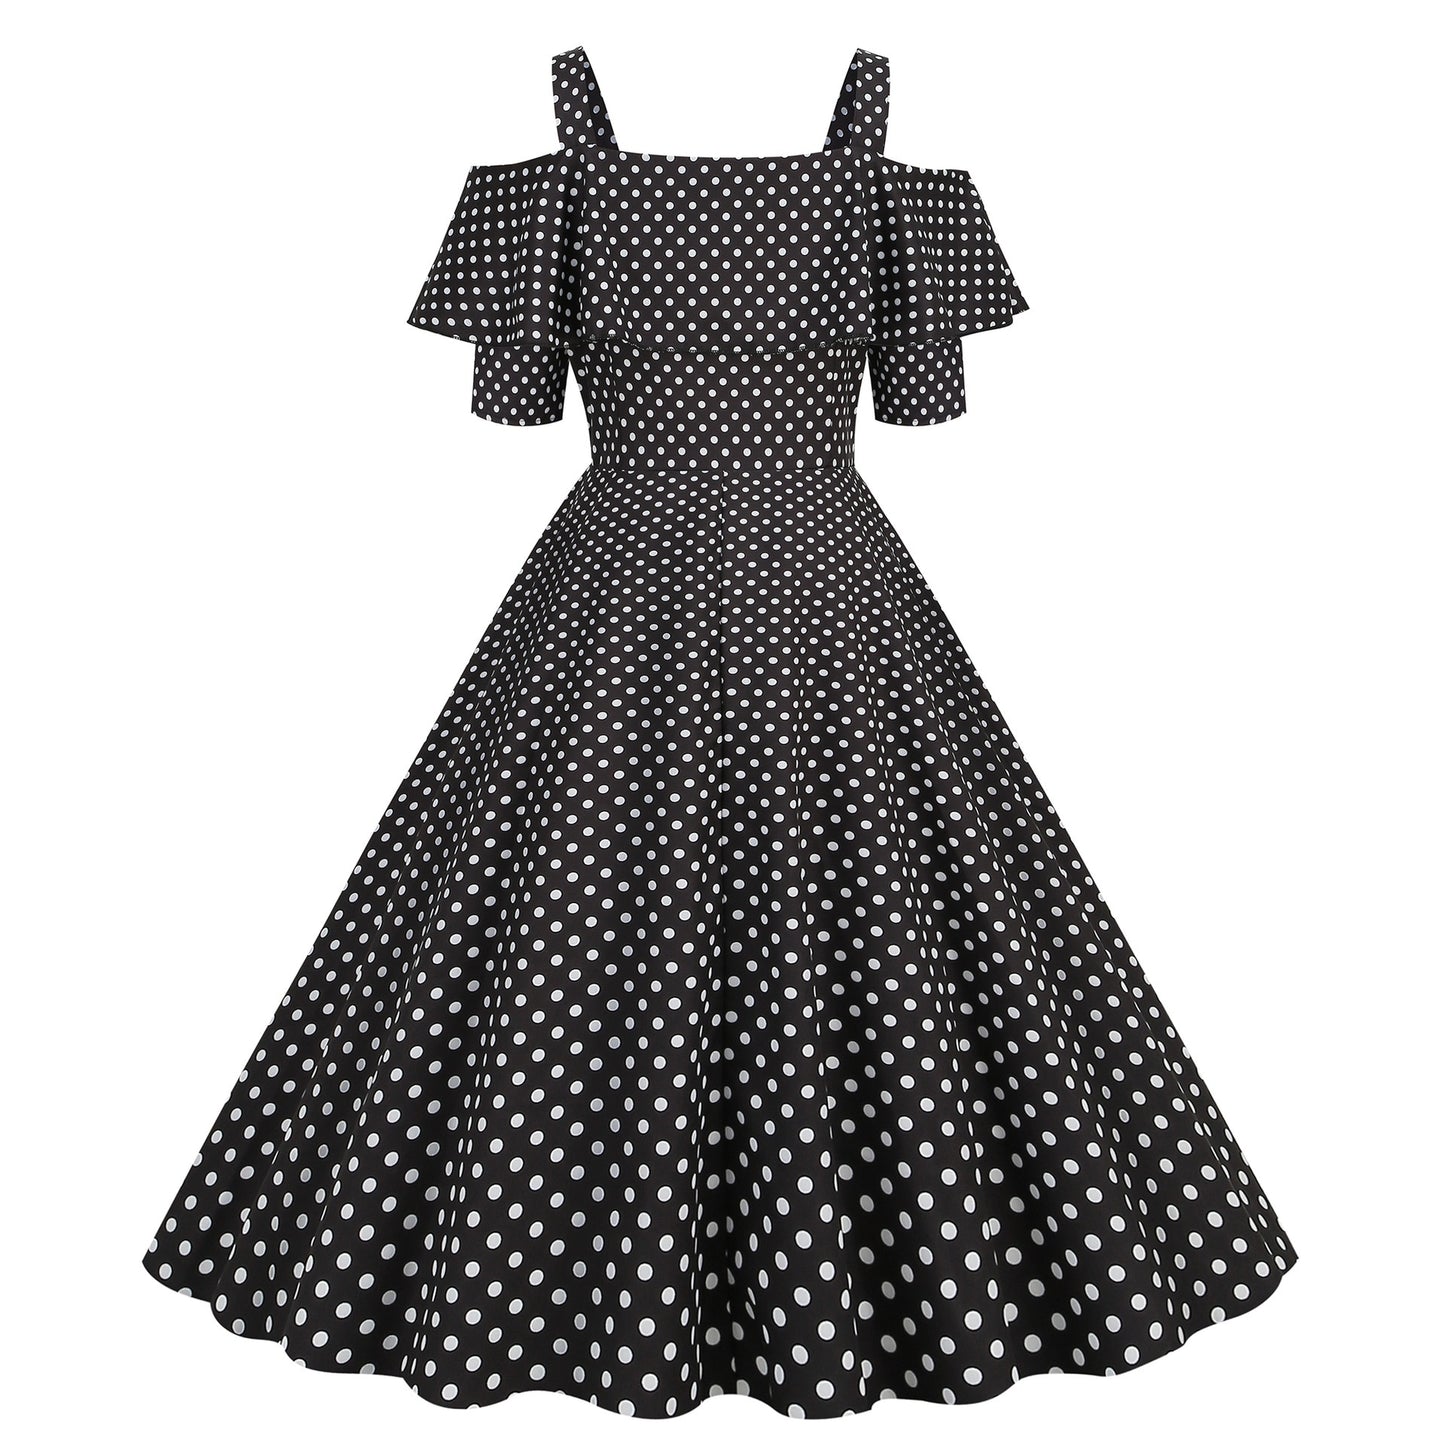 2023 New Vintage Women Dresses Casual A Line Women Party Fashion Dot Print Short Sleeve 50s Housewife Evening Party Dress Women